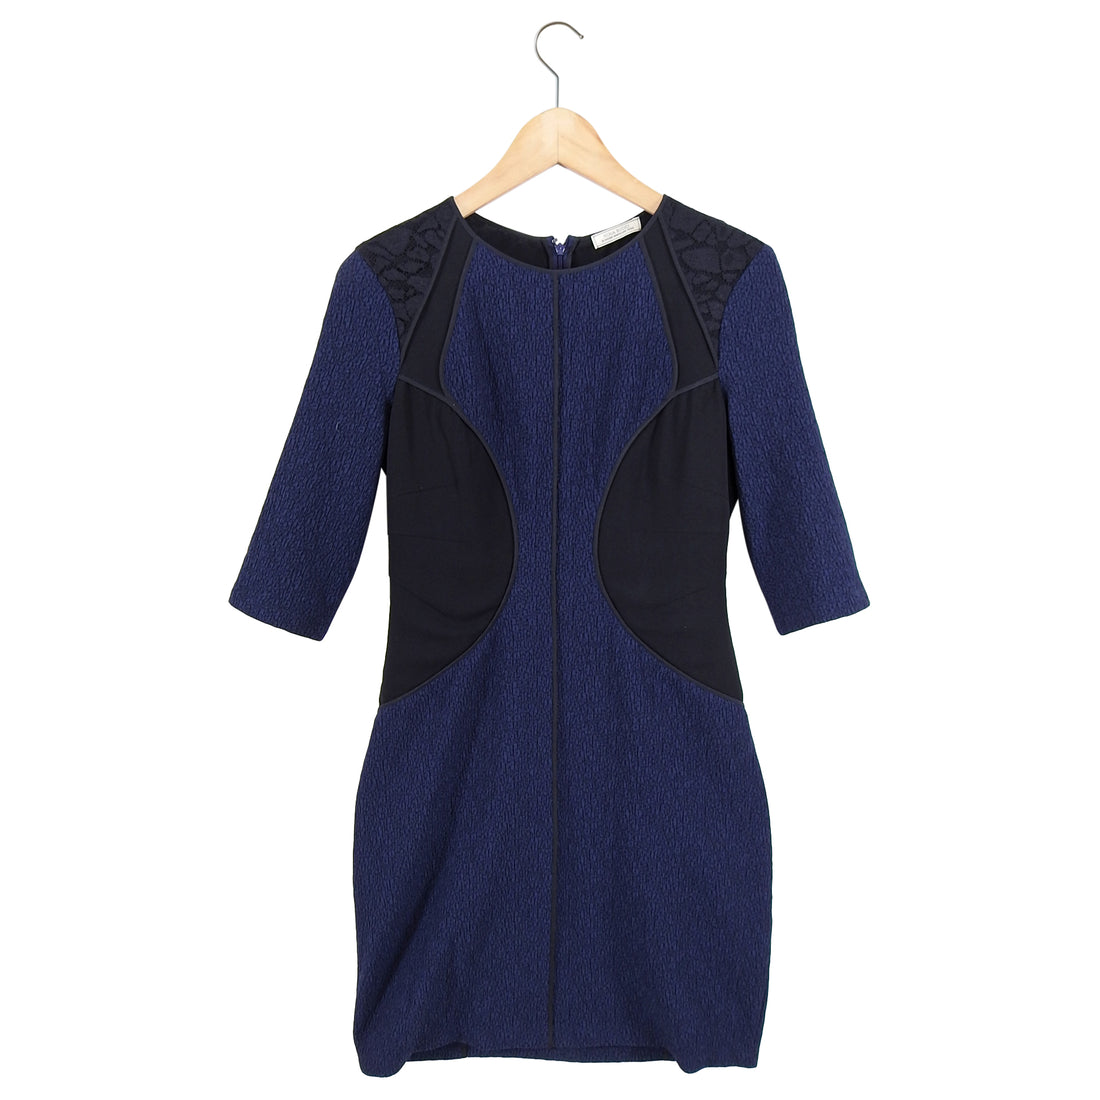 Nina Ricci Navy Seamed Fitted Dress with 3/4 Sleeves - M